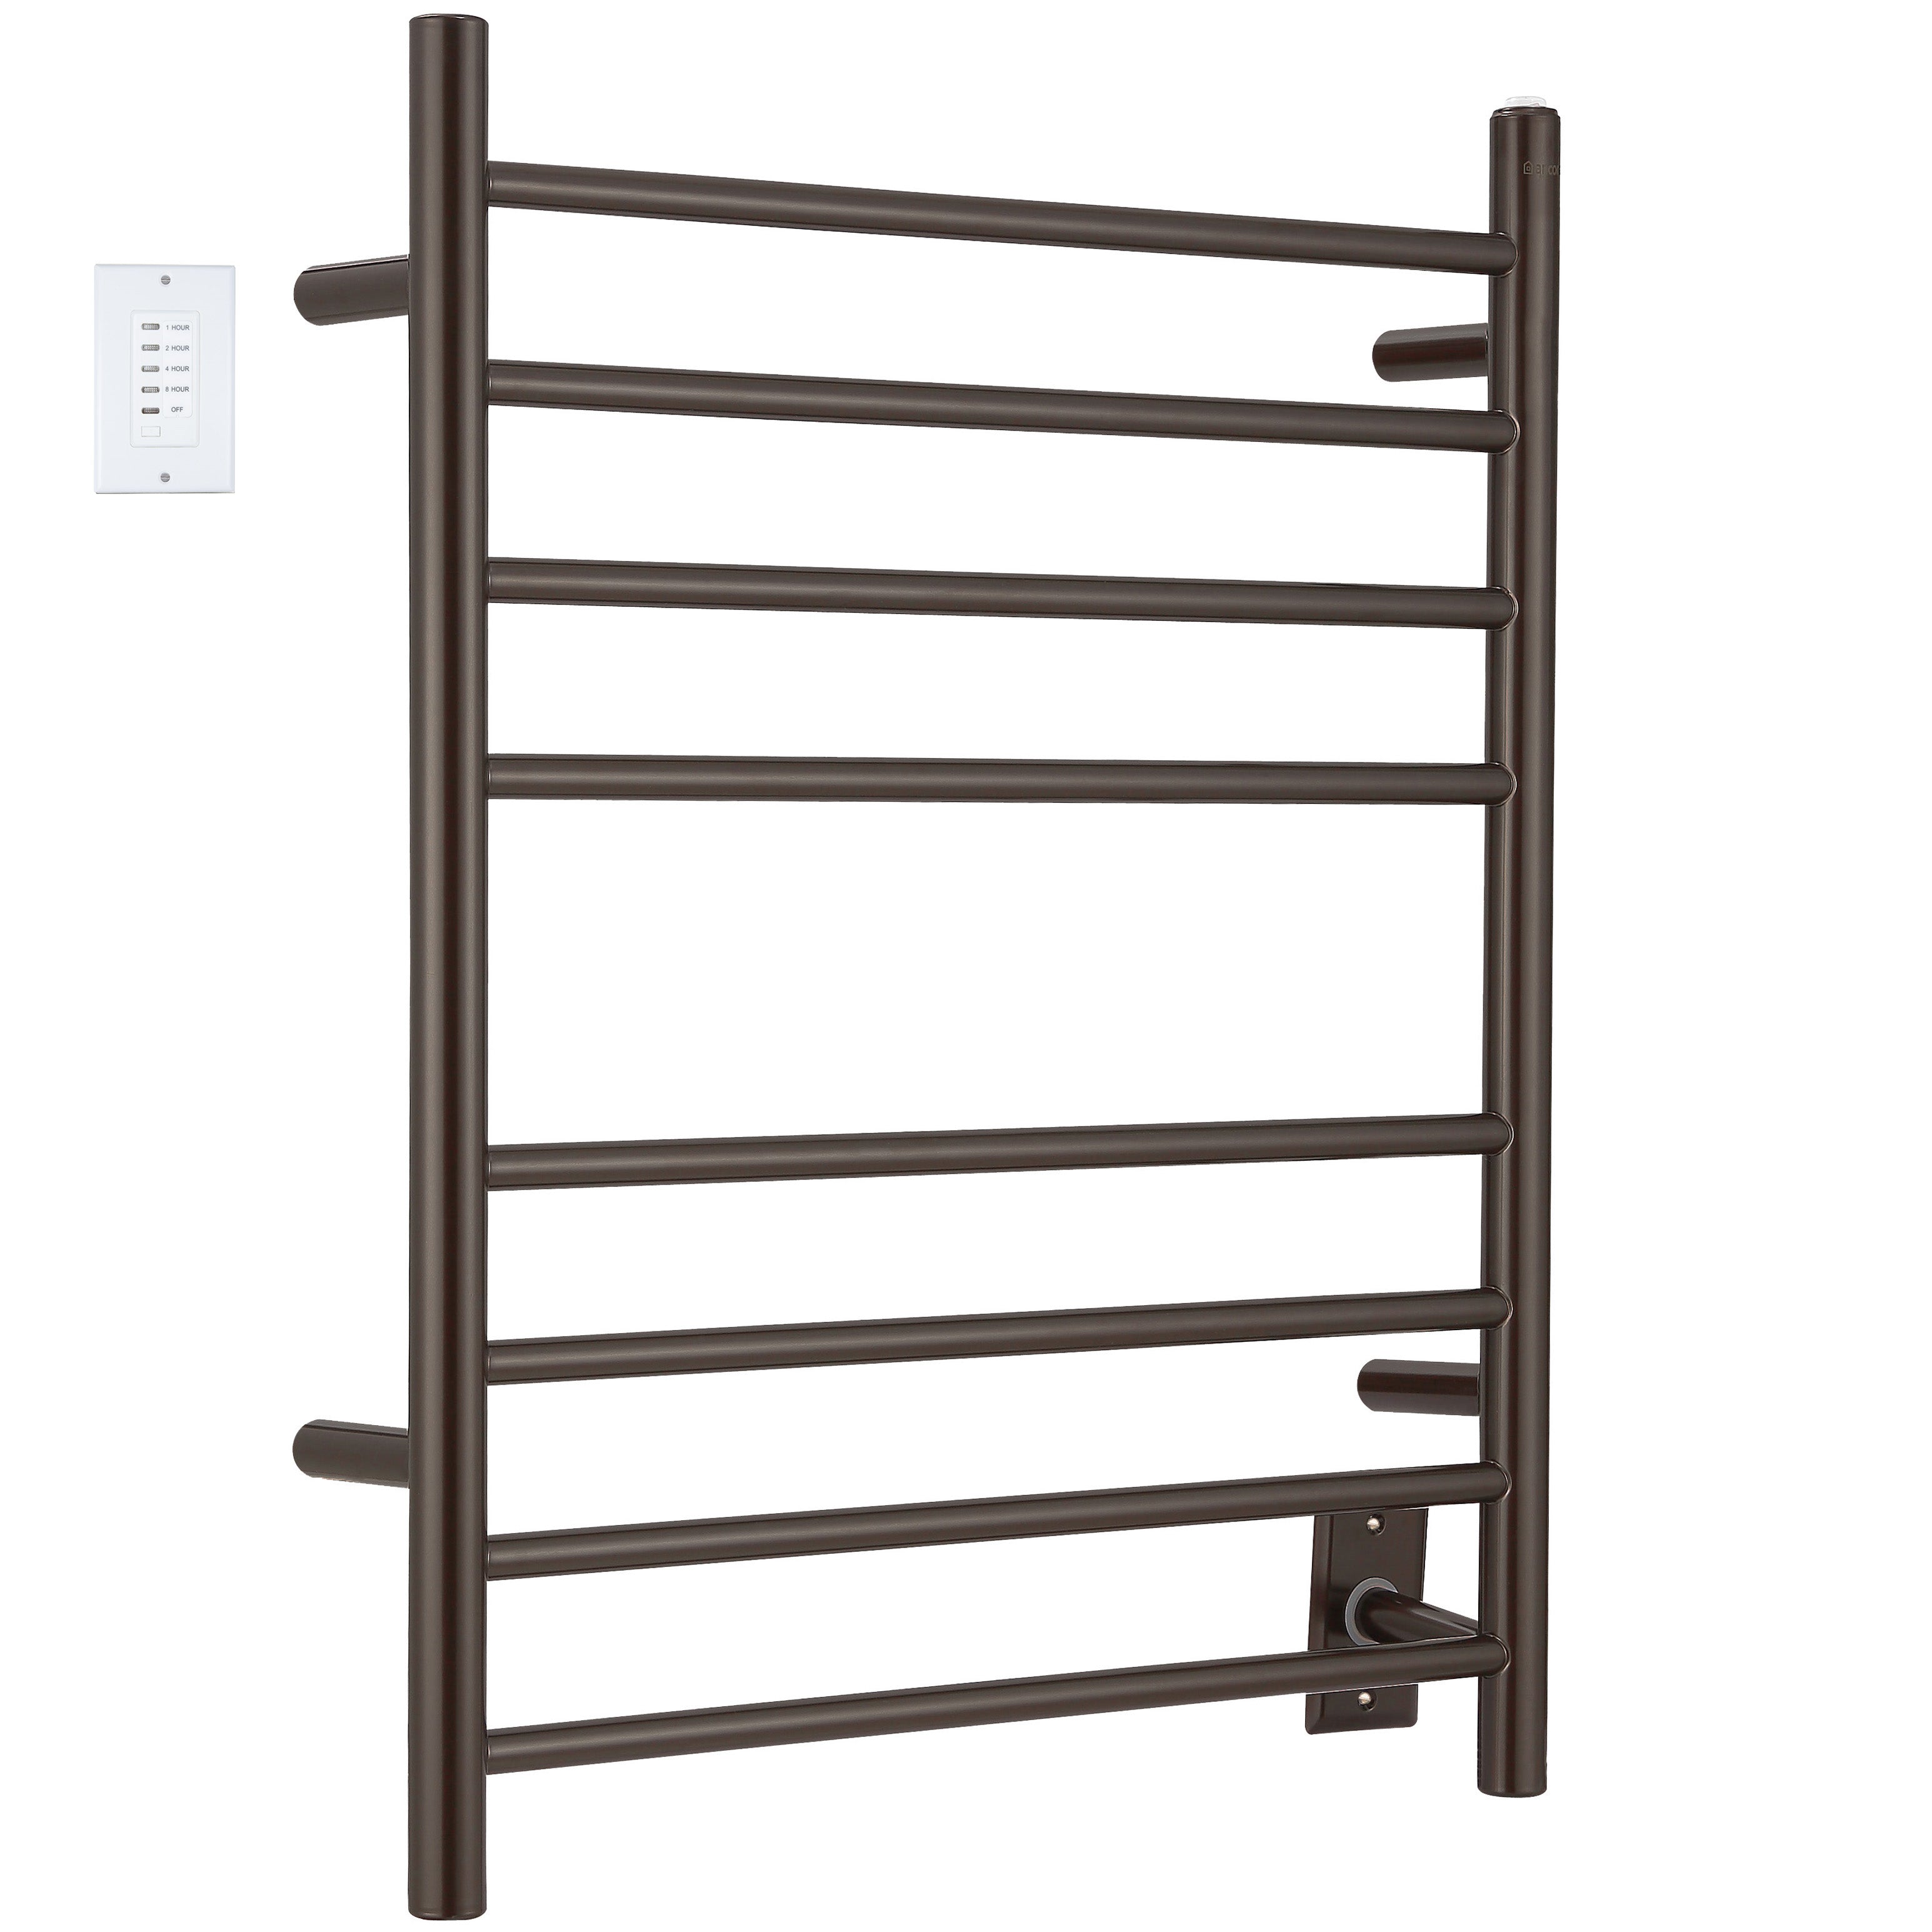 Ancona Prestige Dual 8-Bar Hardwired and Plug-in Towel Warmer in Oil Rubbed Bronze Stainless Steel with Wall Countdown Timer